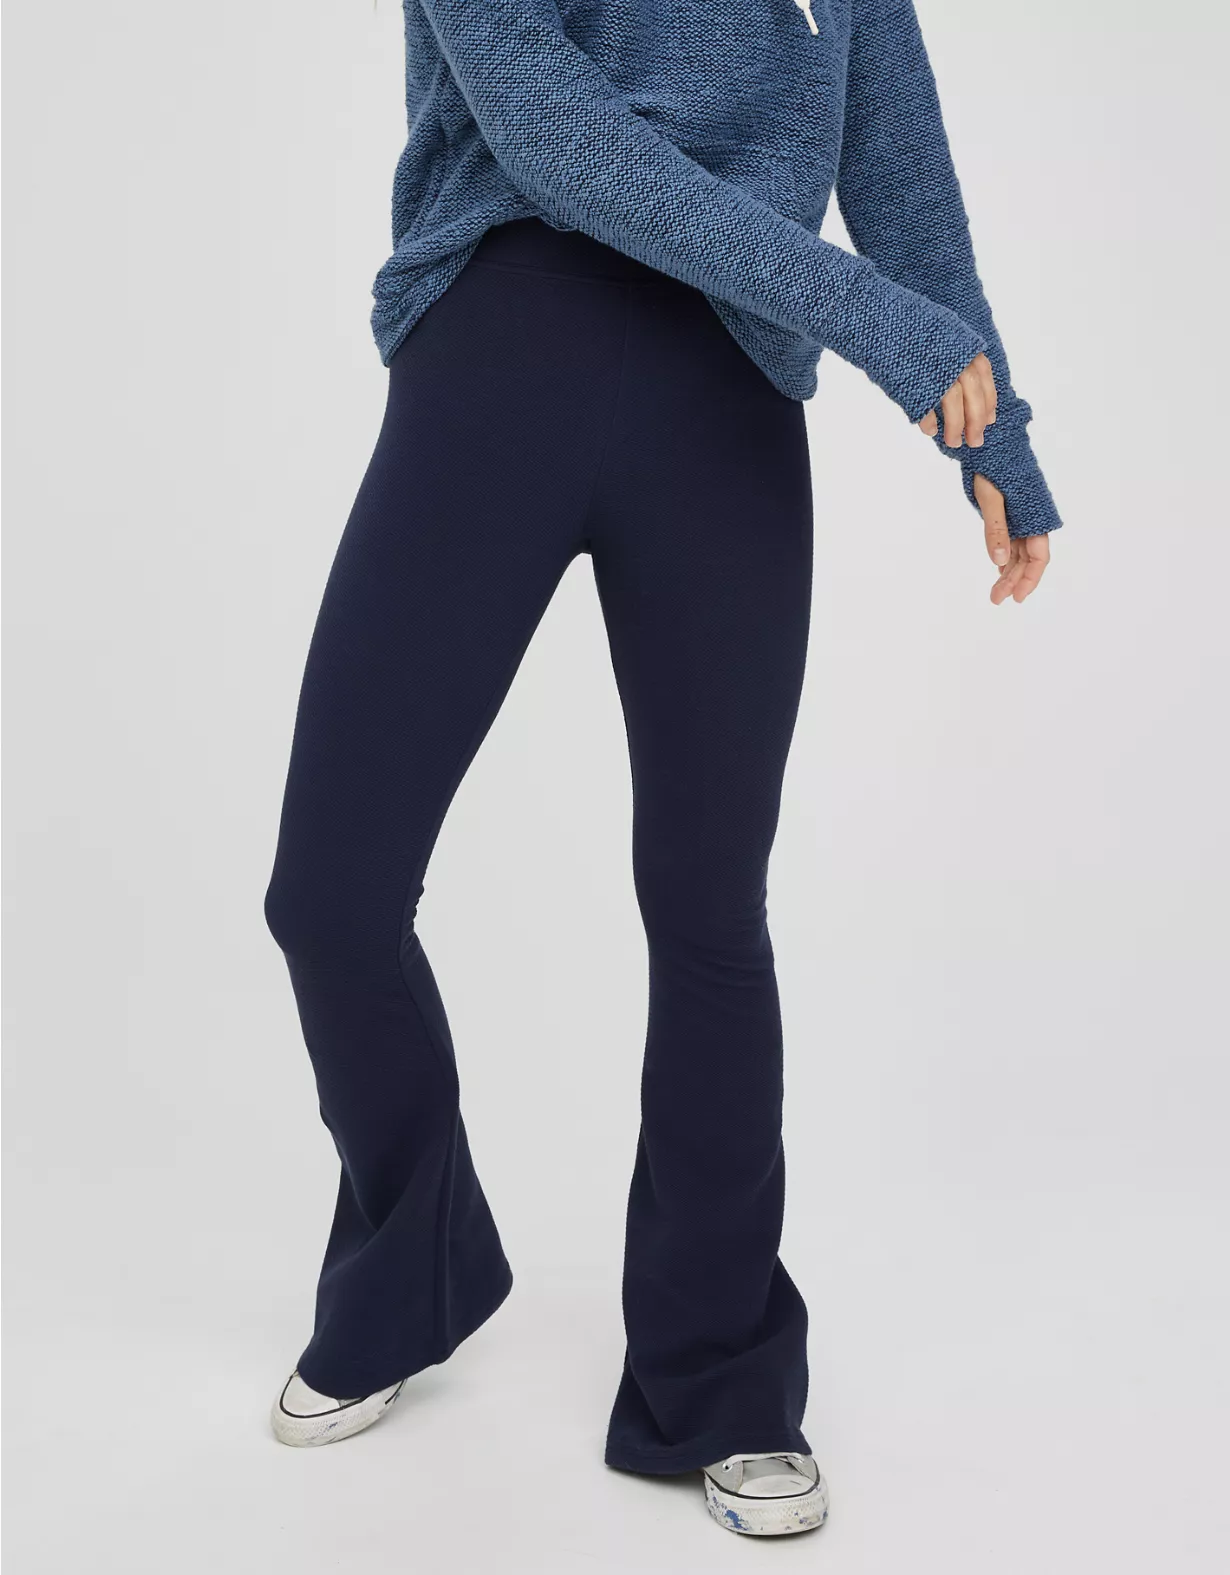 OFFLINE By Aerie PartyFavor High Waisted Flare Legging